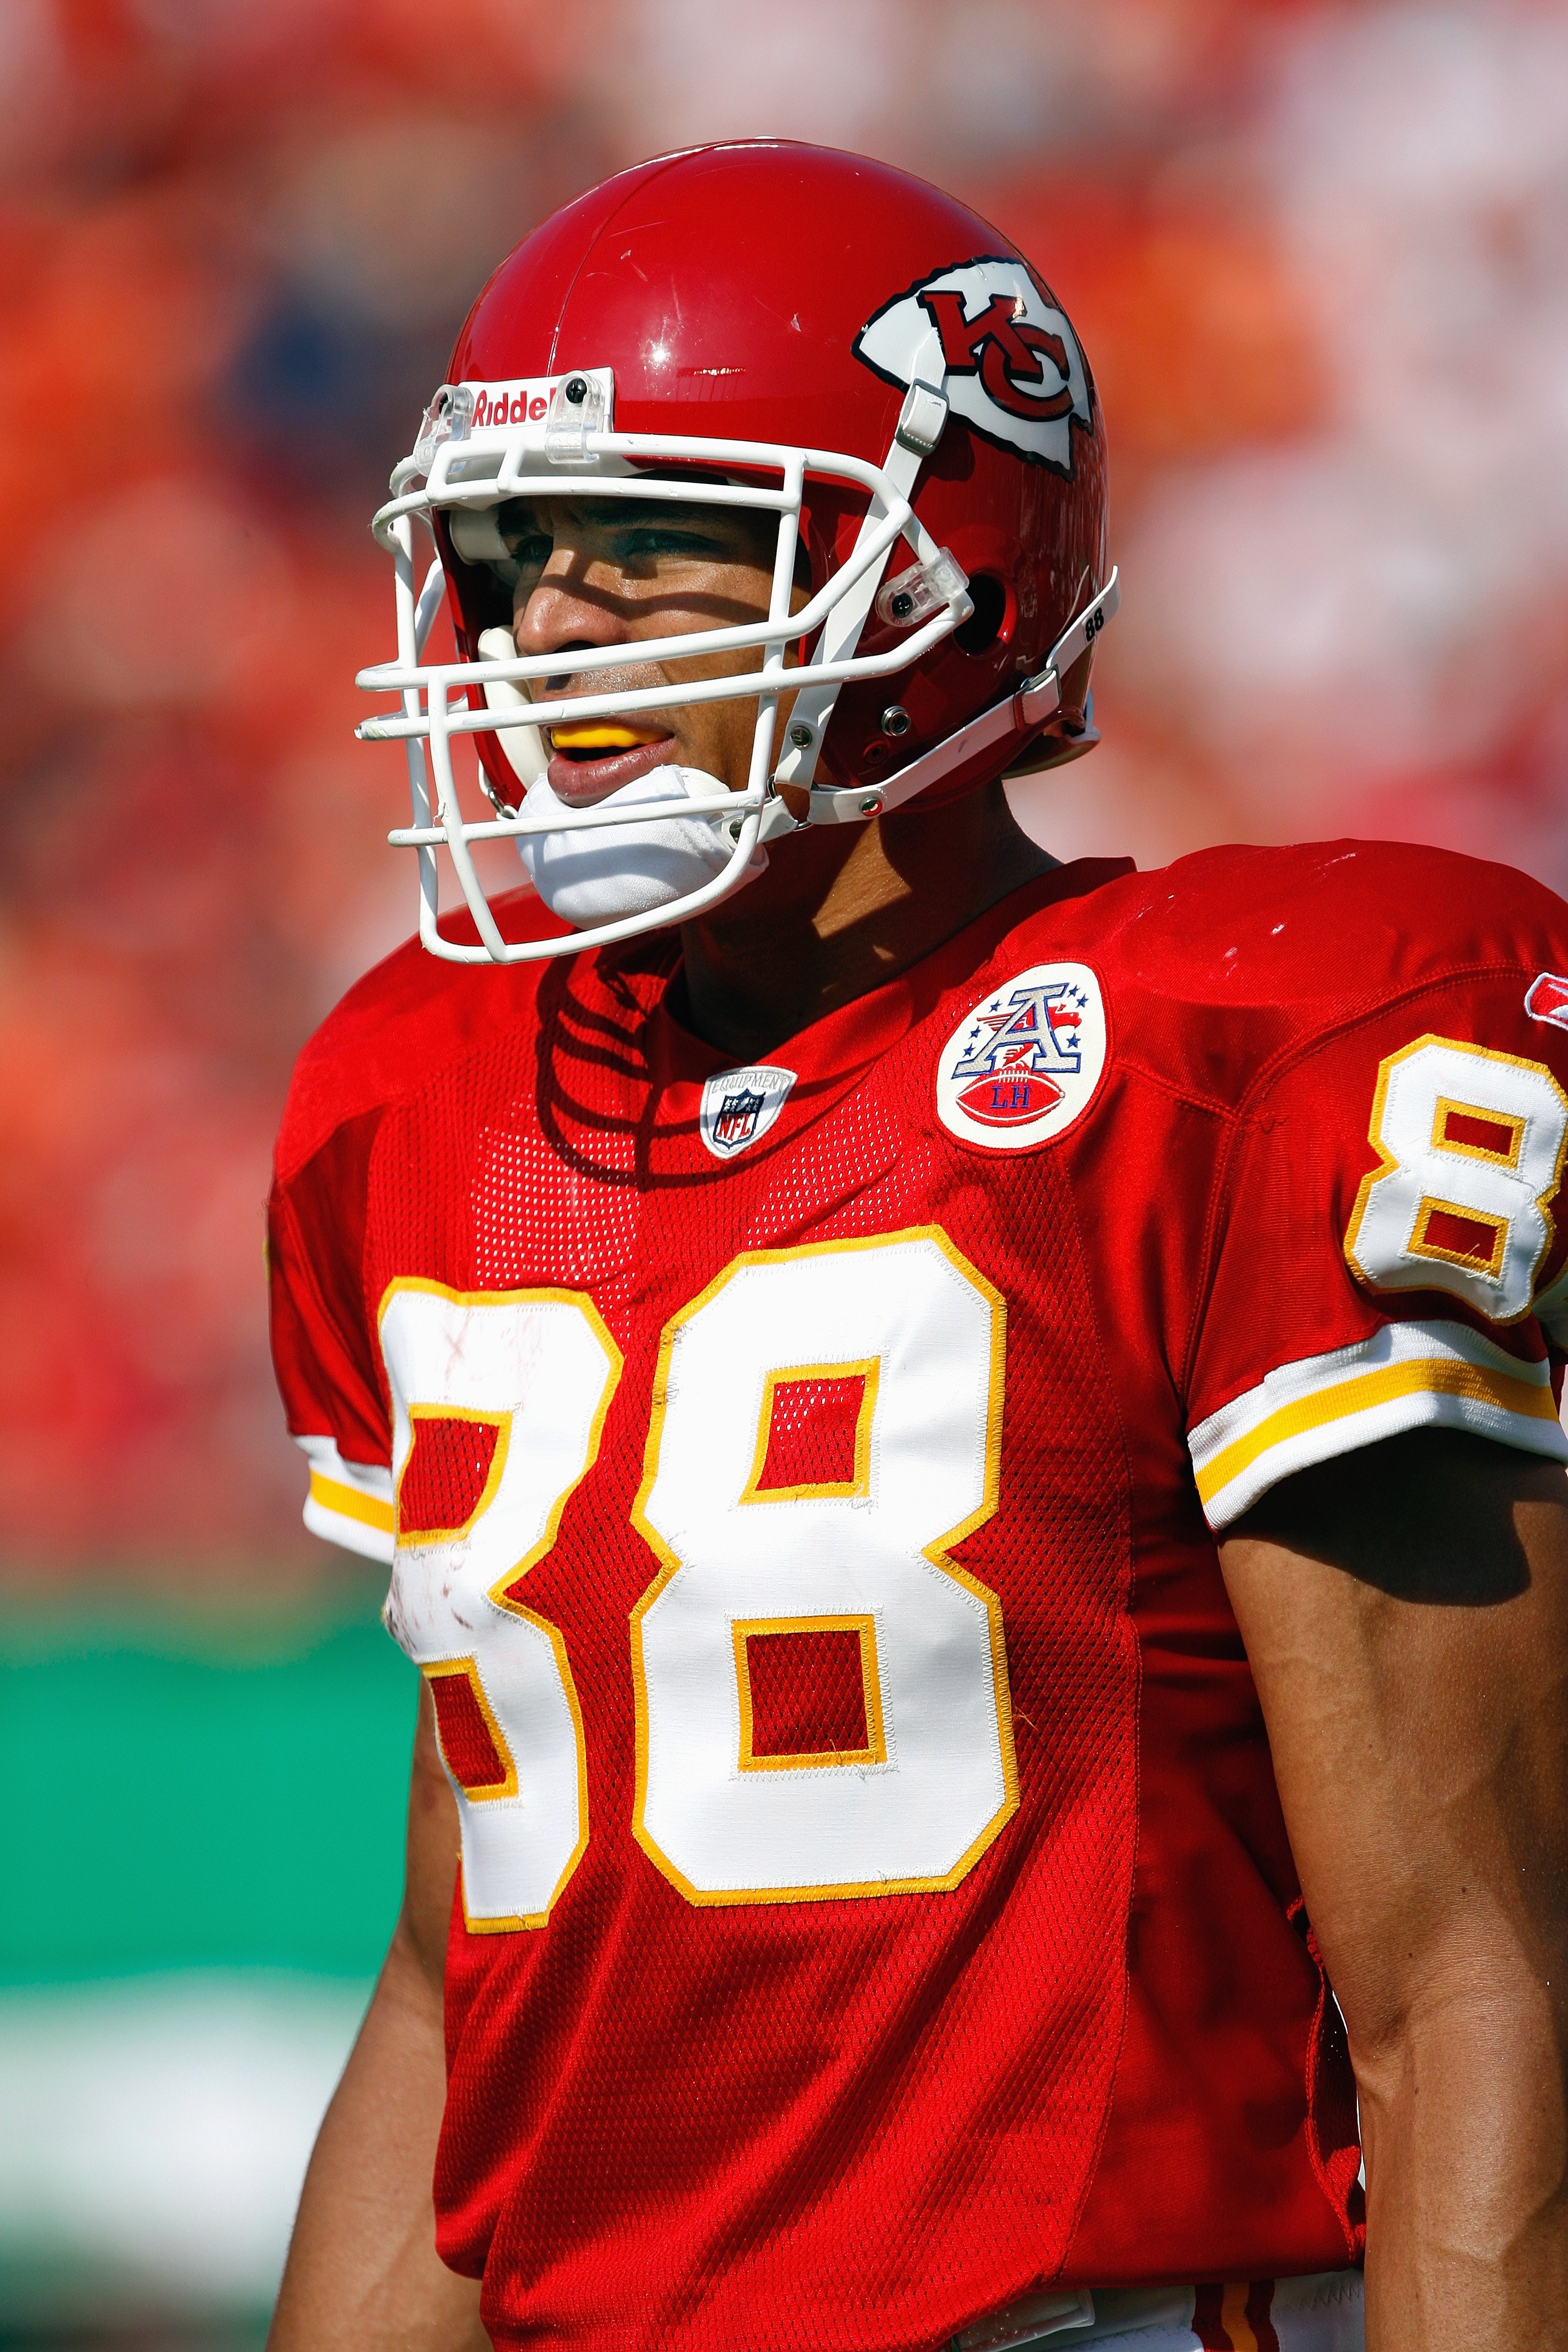 KANSAS CITY - SEPTEMBER 28:  Tony Gonzalez #88 of the Kansas City Chiefs walks on the field during the game against the Denver Broncos on September 28, 2008 at Arrowhead Stadium in Kansas City, Missouri. The Chiefs defeated the Broncos 33-19.  (Photo by: